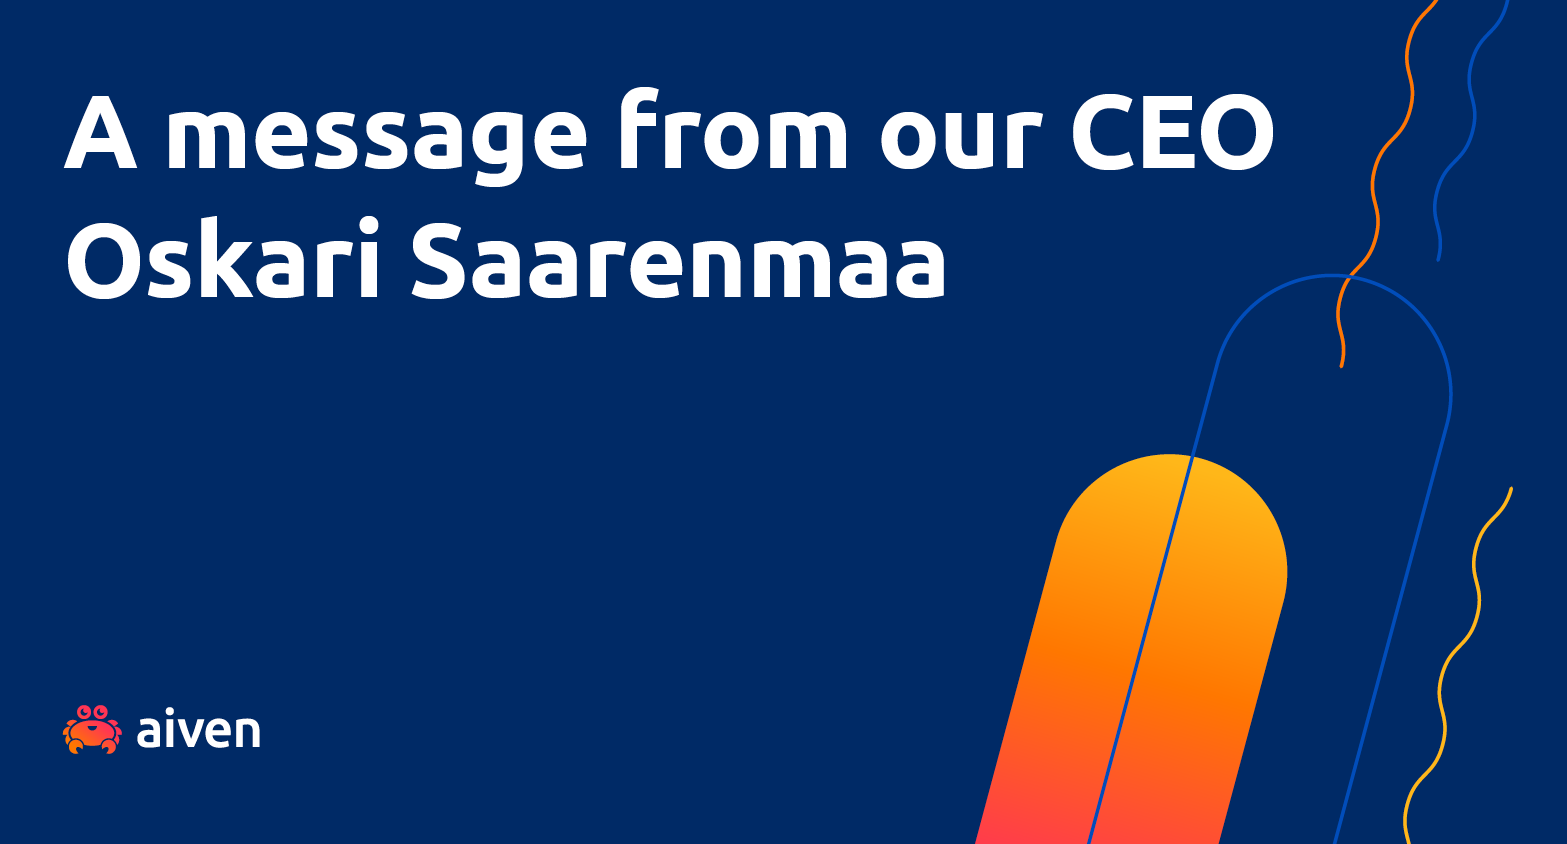 A message from our CEO Oskari Saarenmaa